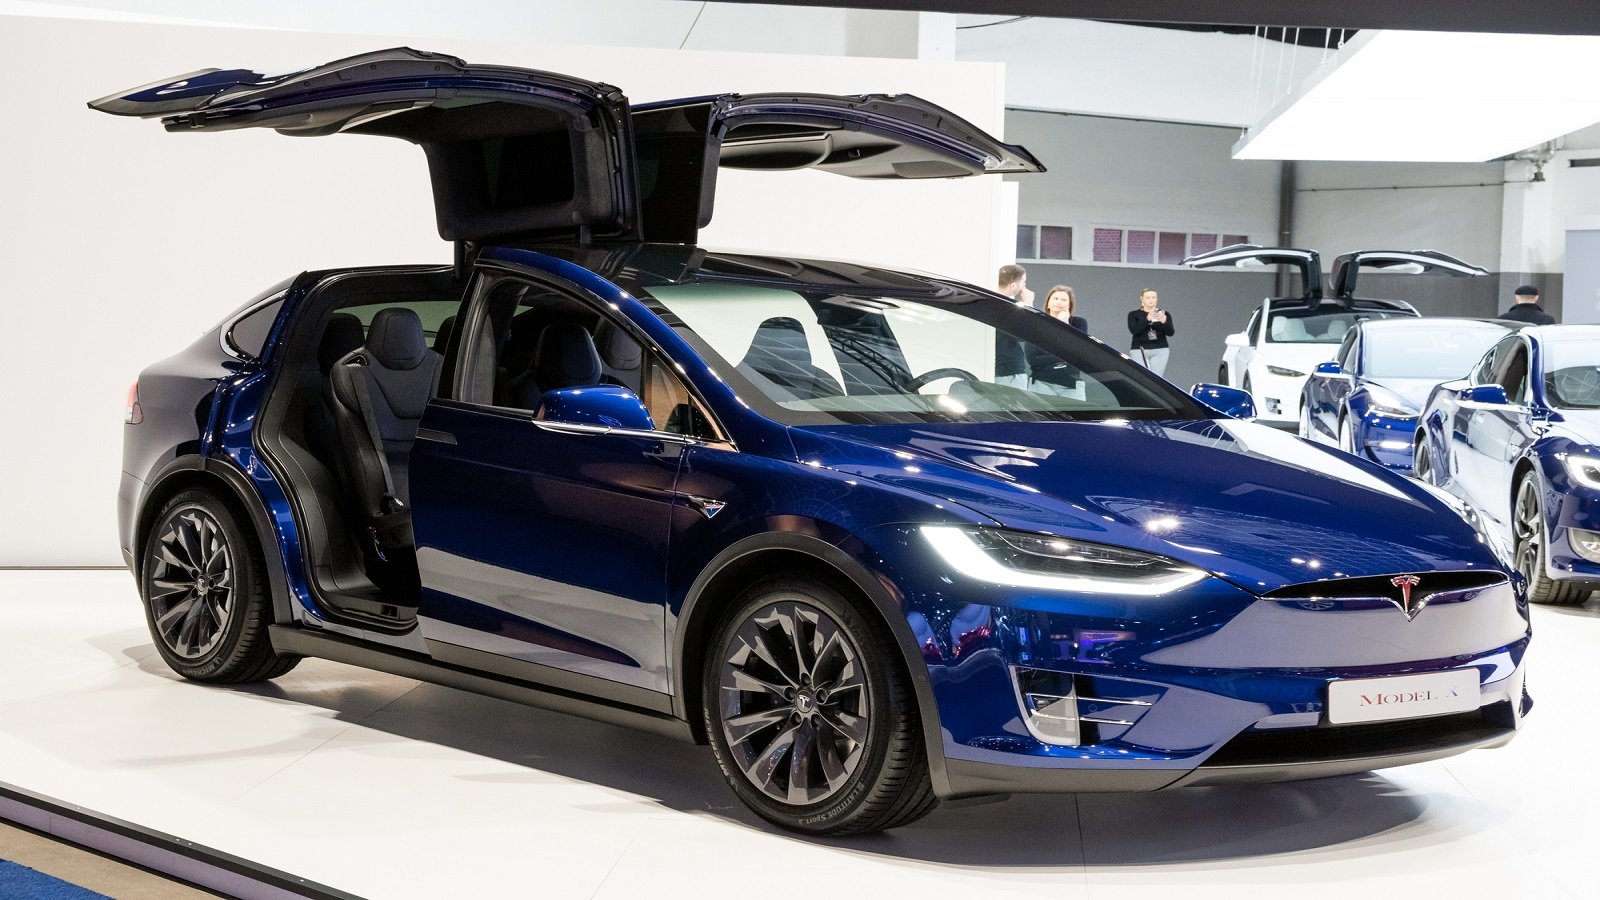 <p>The Tesla Model X has made quite an impact in the electric vehicle market. However, there are a few reasons why some prospective buyers might want to think twice before purchasing this specific model in 2024.</p><ul> <li><strong>High Price Tag</strong>: The Model X is known for its expensiveness. While this can be justified by its advanced technology, other EV models may offer similar features at a lower price.</li> <li><strong>Falcon Wing Doors</strong>: The unique <strong>Falcon Wing doors</strong> are a distinctive design choice, but they come with their share of practical issues, such as dealing with tight parking spaces or potential extra maintenance costs.</li> <li><strong>Availability of Alternatives</strong>: The EV market is rapidly growing, and the number of options for consumers is increasing. There are many new models to consider, some of which may provide better value.</li> <li><strong>Potential for Decreased Popularity</strong>: As the market becomes more saturated, the Tesla Model X could lose some of its popularity among consumers.</li> </ul>